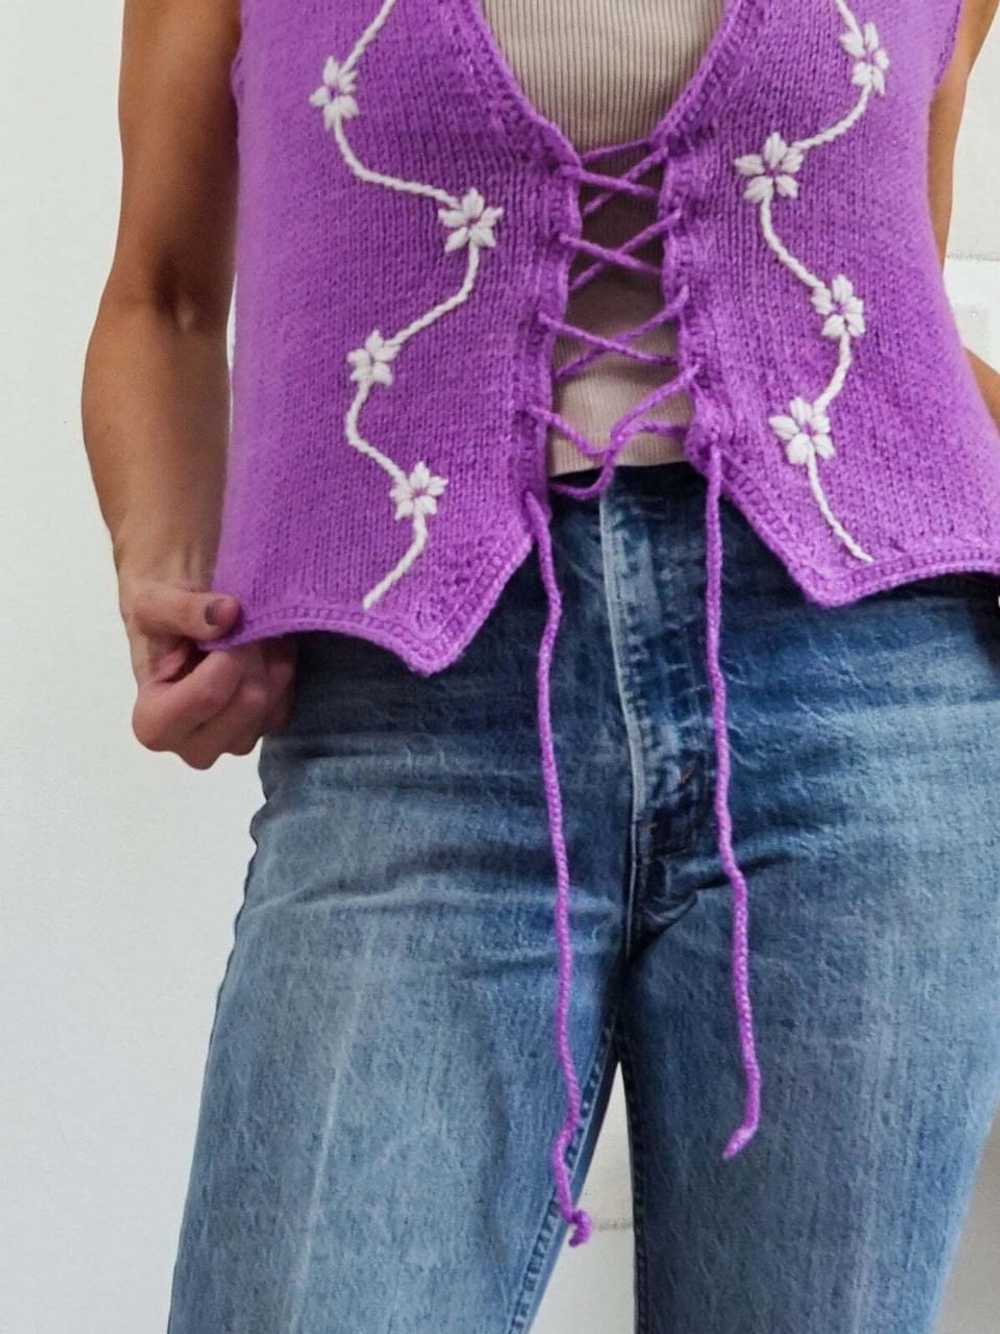 Handmade 70's Lace Up Vest (No Tag) - image 5